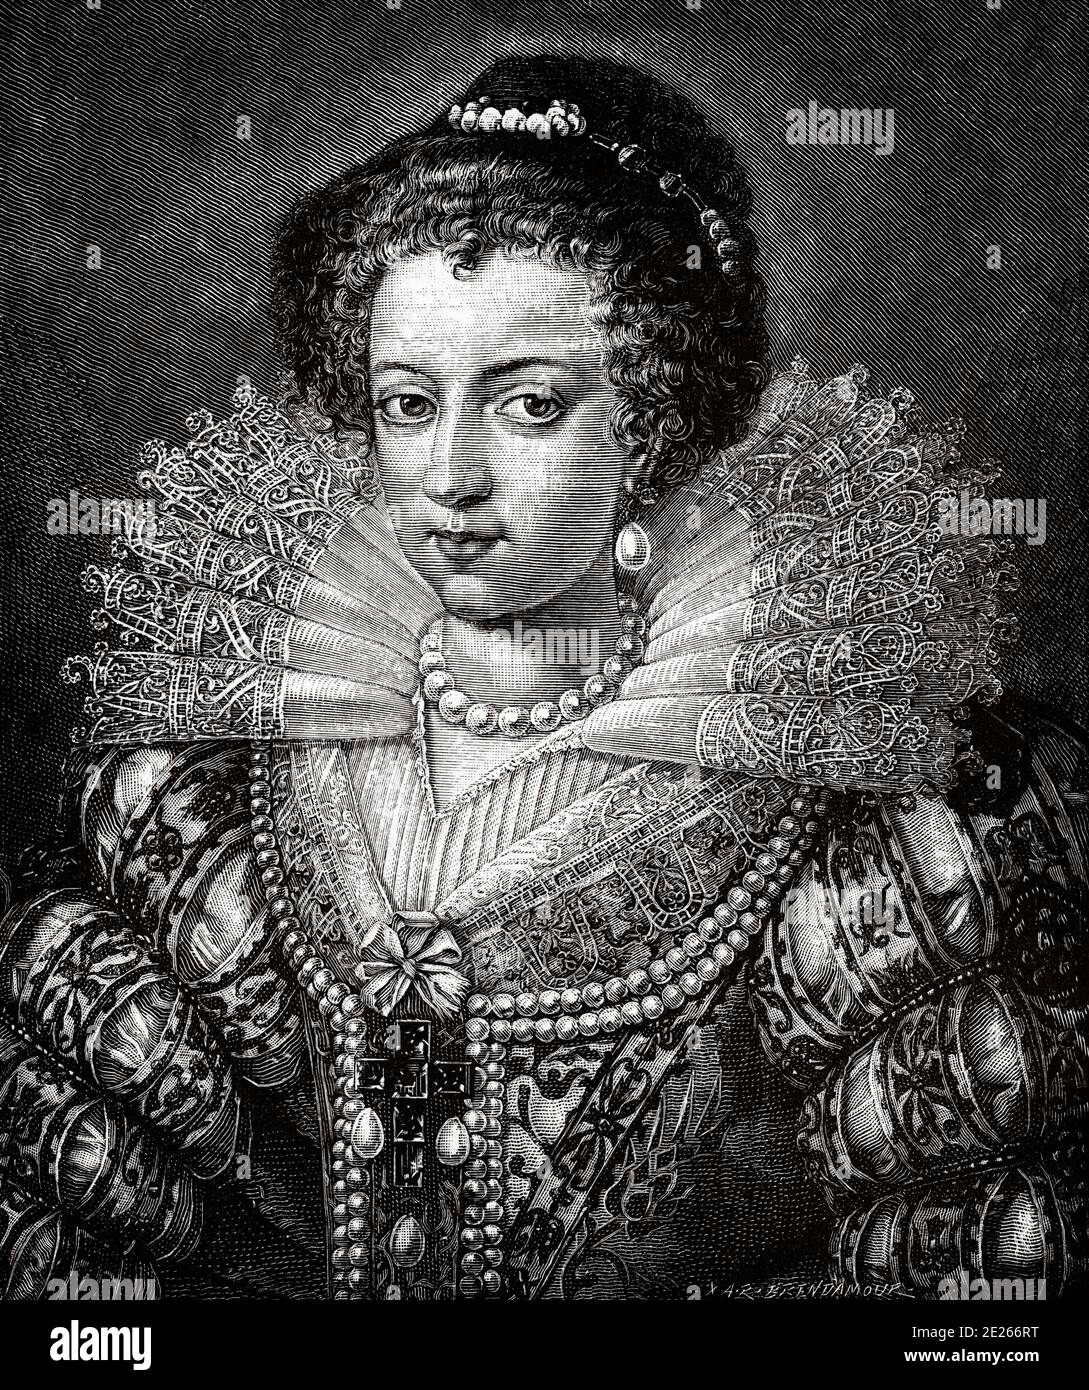 Isabella of Austria. Portrait Elisabeth of Austria (Vienna, Austria, July 5, 1554 - January 22, 1592) was archduchess of Austria, daughter of the Holy Roman Emperor Maximilian II of Habsburg and Mary of Austria and Portugal, Infanta of Spain. She was a Catholic princess, considered one of the most beautiful women of her time. History of Philip II of Spain. Old engraving published in Historia de Felipe II by H. Forneron, in 1884 Stock Photo